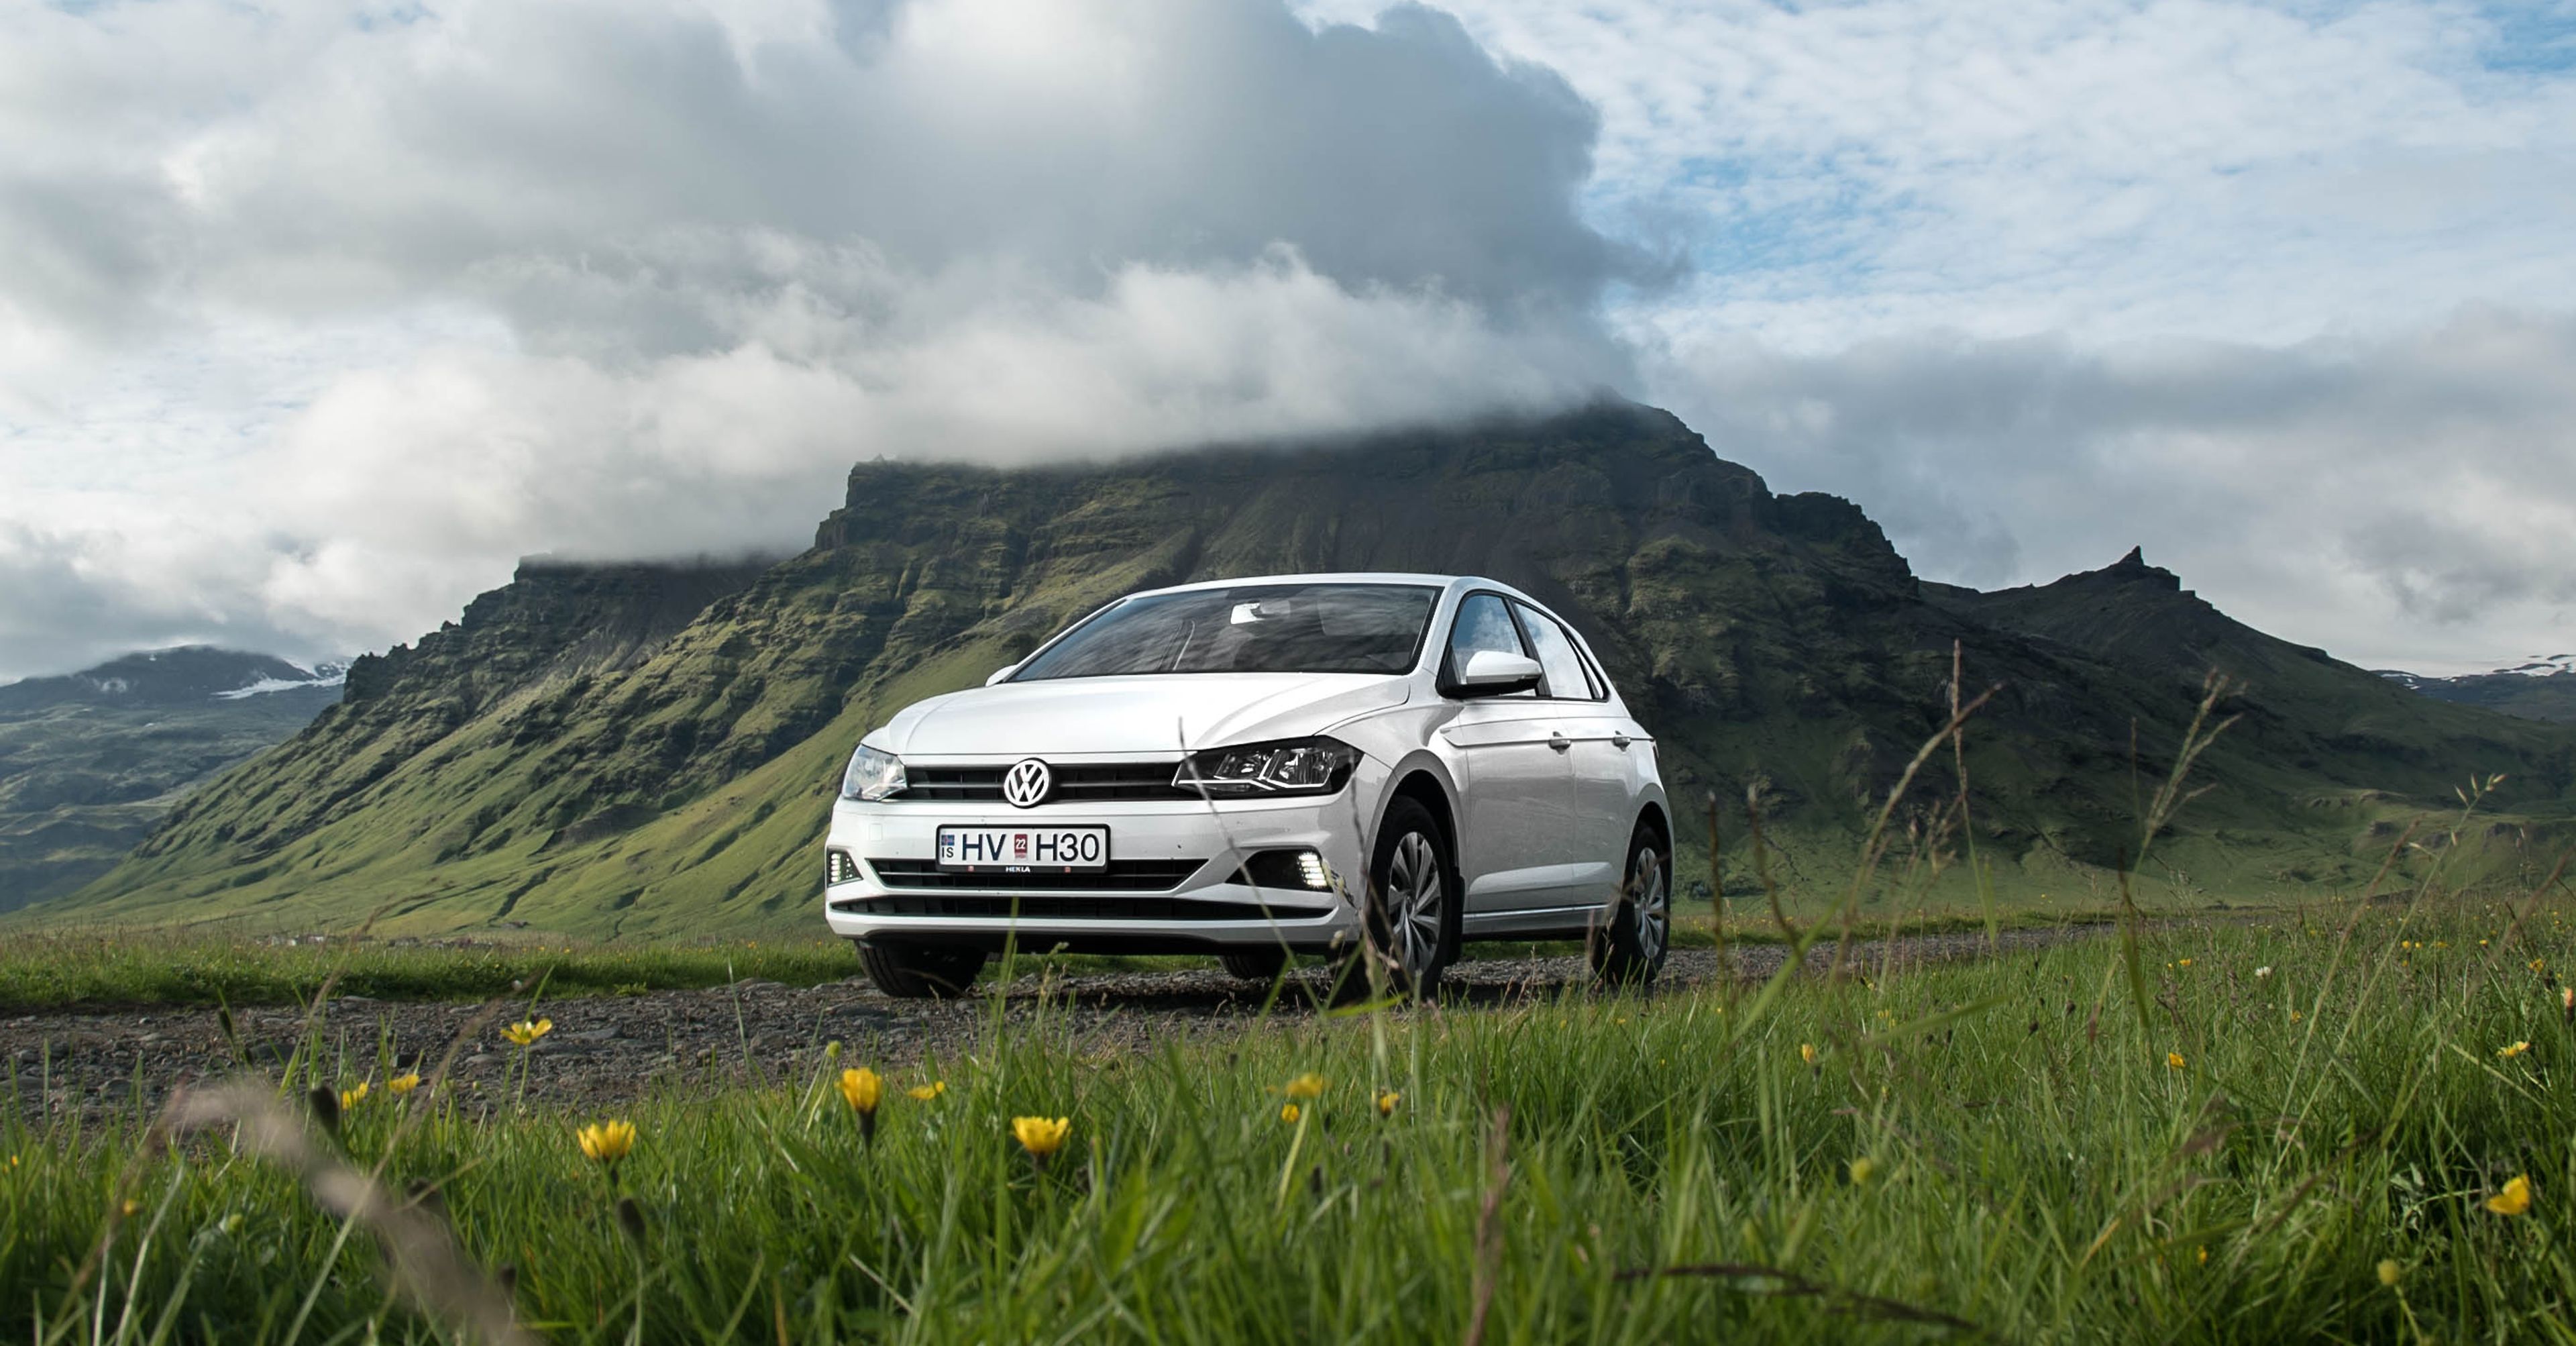 Journey through the beauty of Iceland with our reliable and stylish Volkswagen Polo rental car.